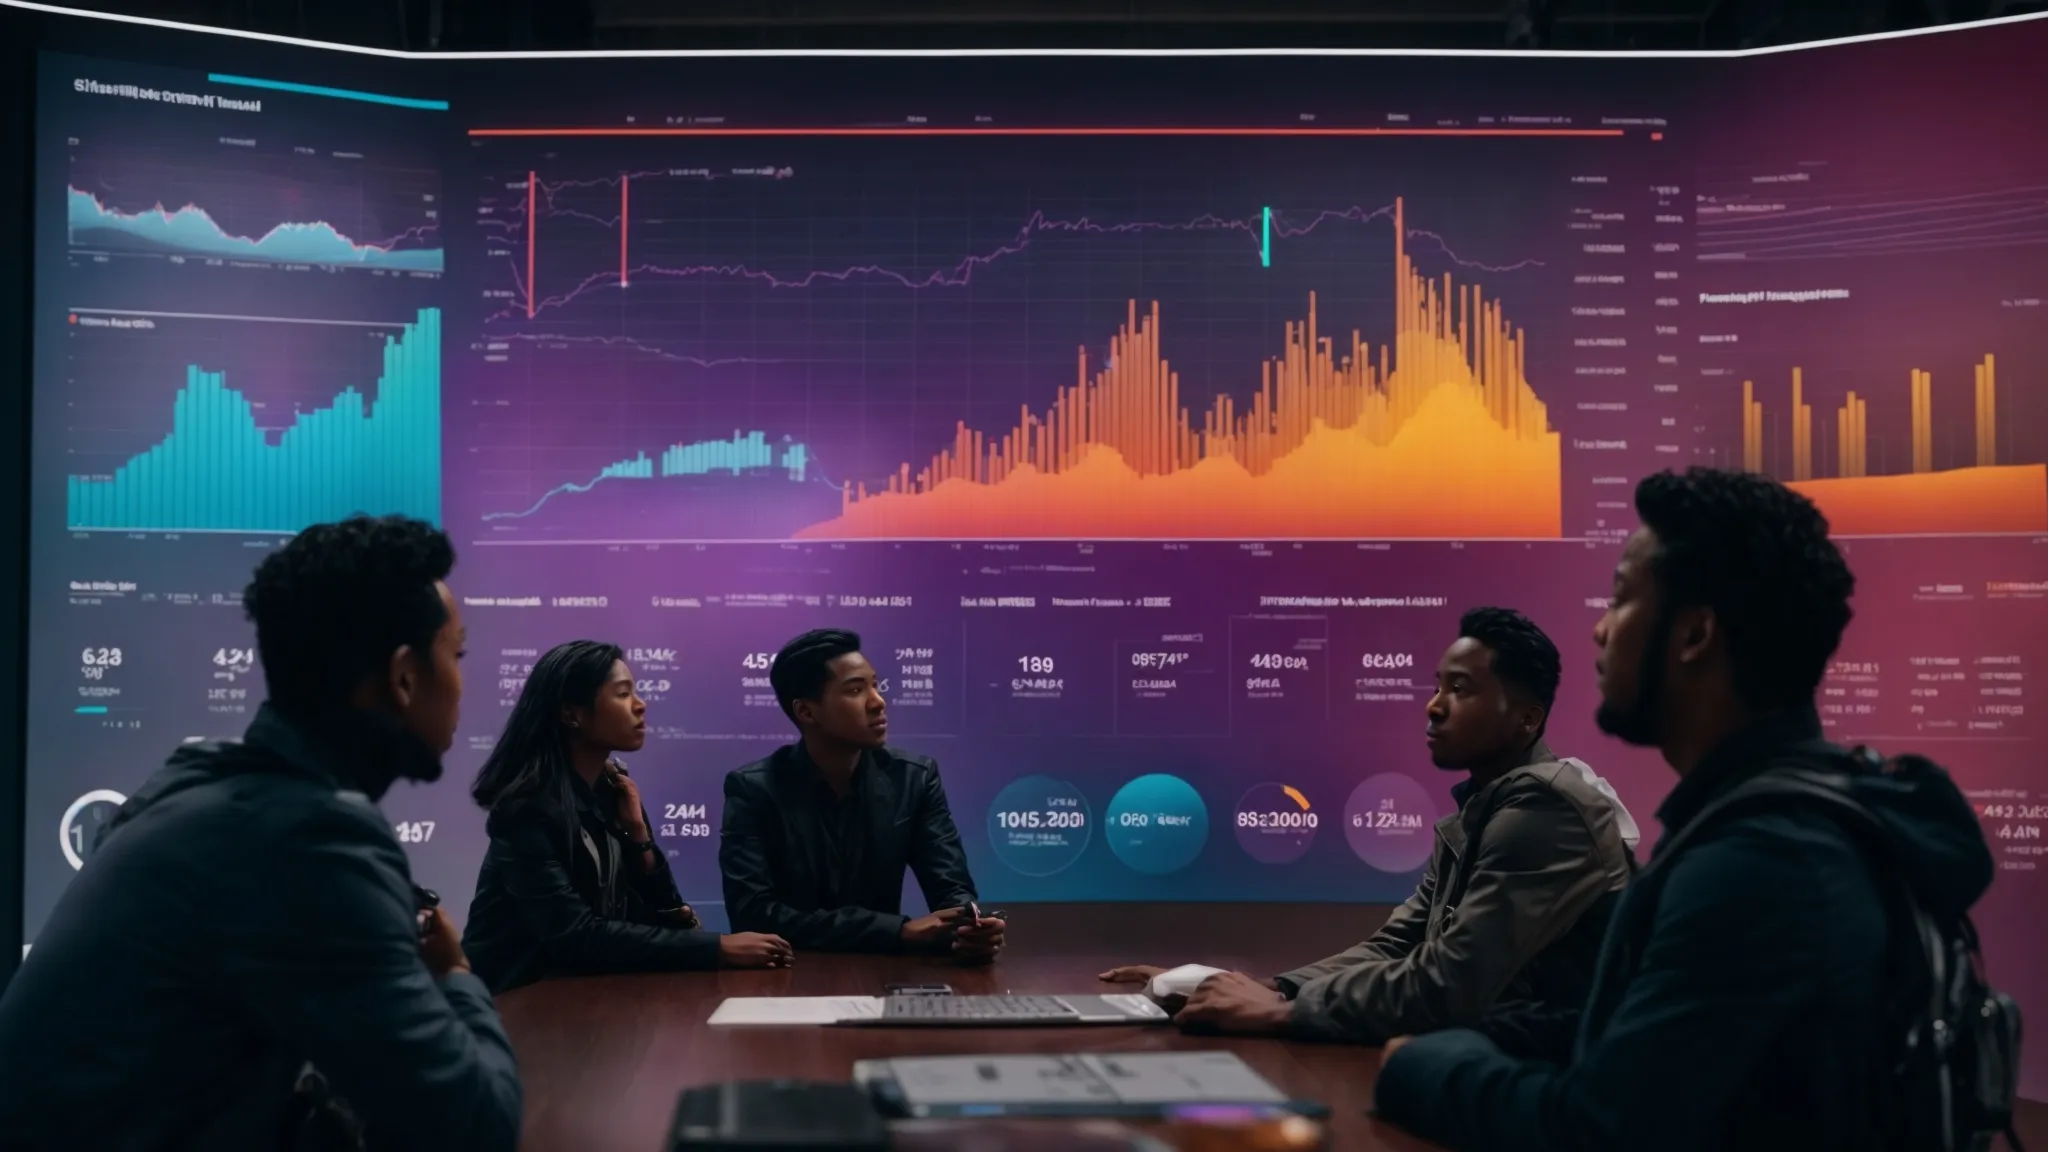 a diverse group of people gathered around a giant digital screen displaying colorful graphs and financial data.